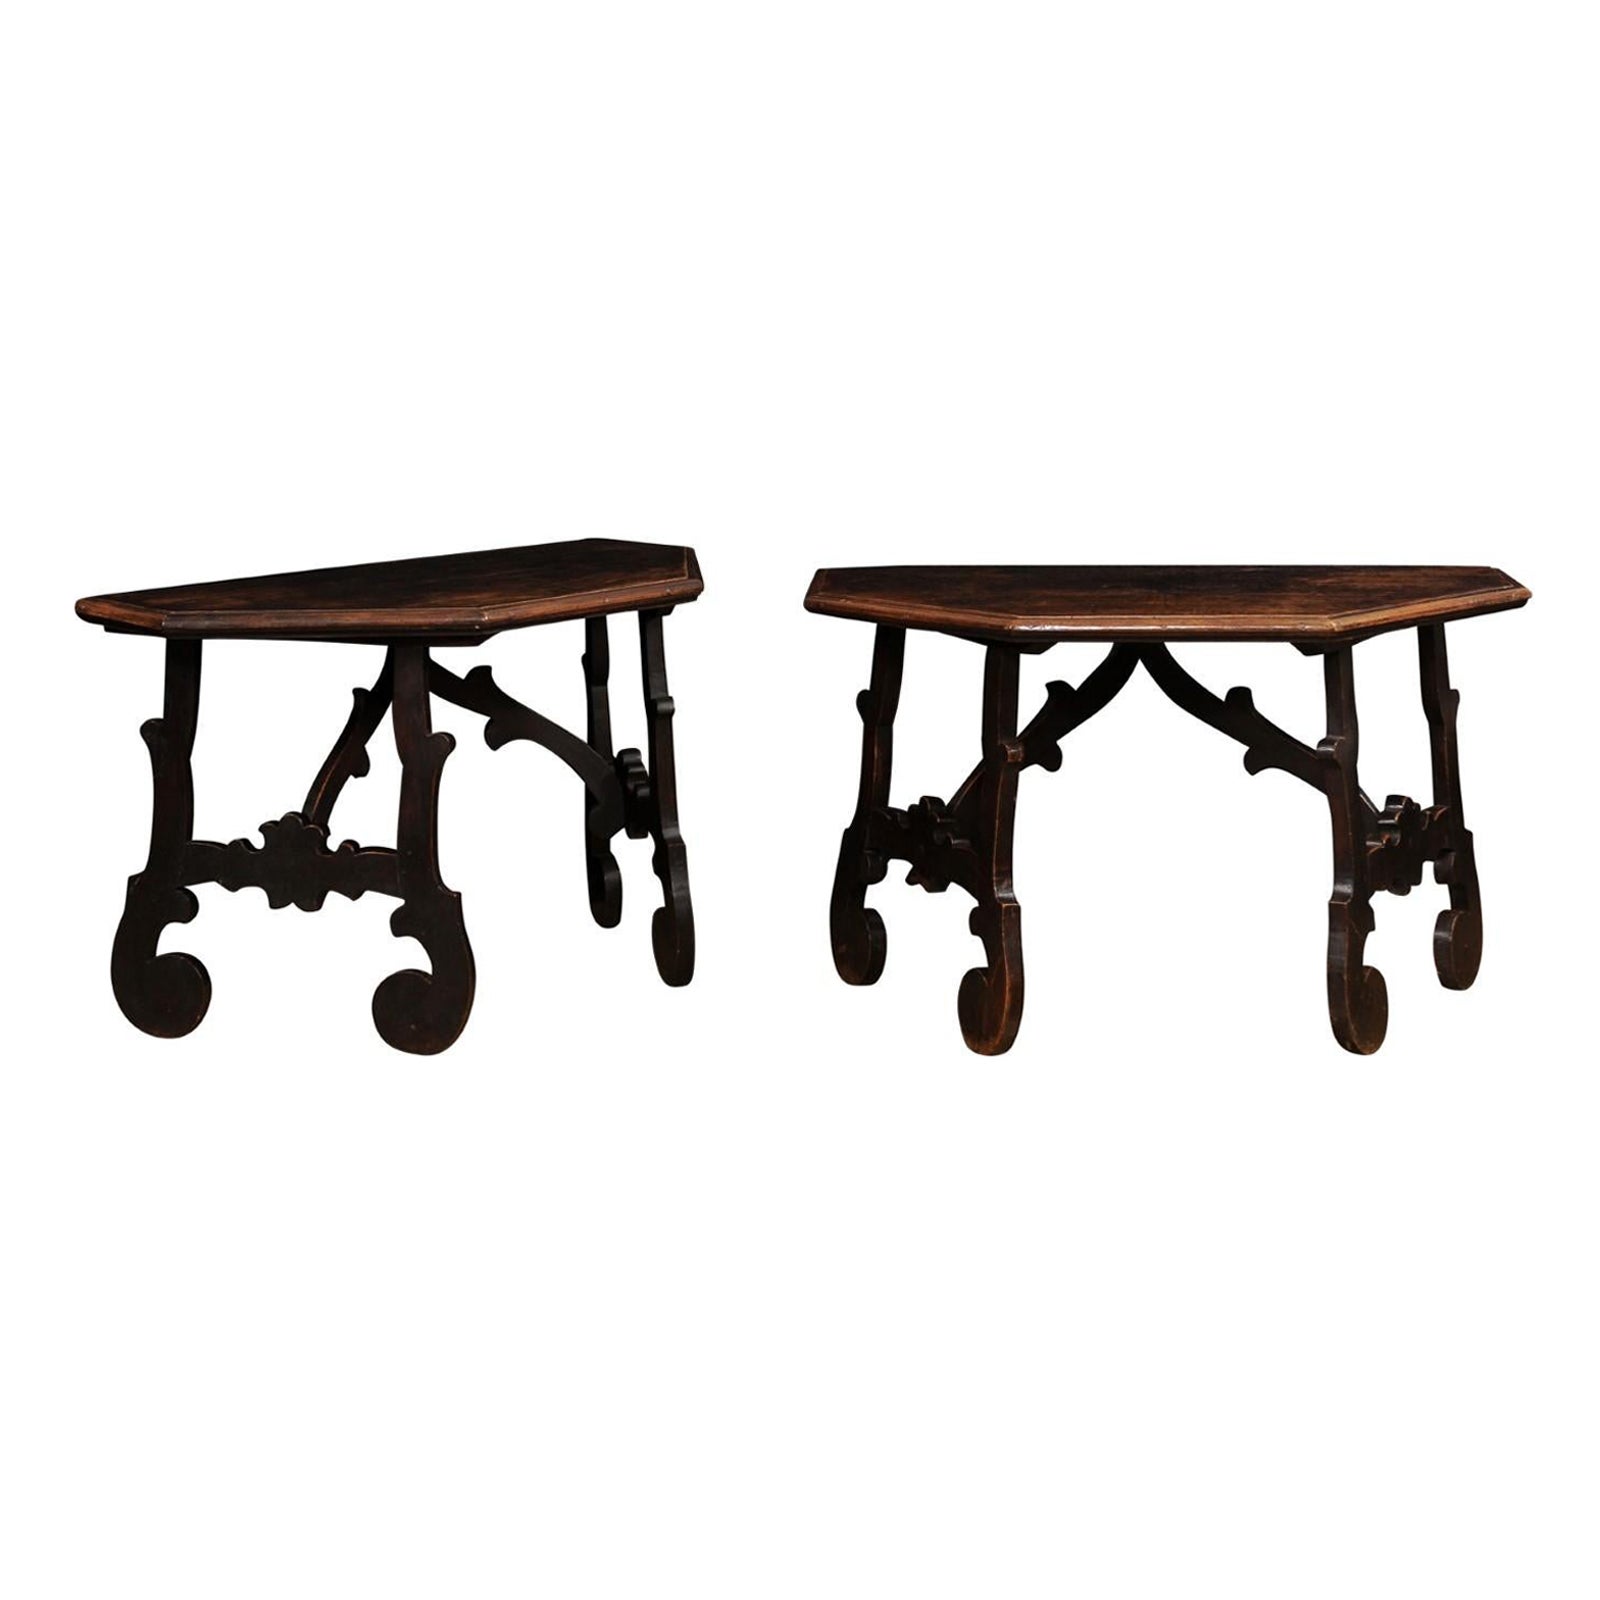 17th Century Italian Baroque Walnut Fratino Consoles with Carved Bases, a Pair For Sale